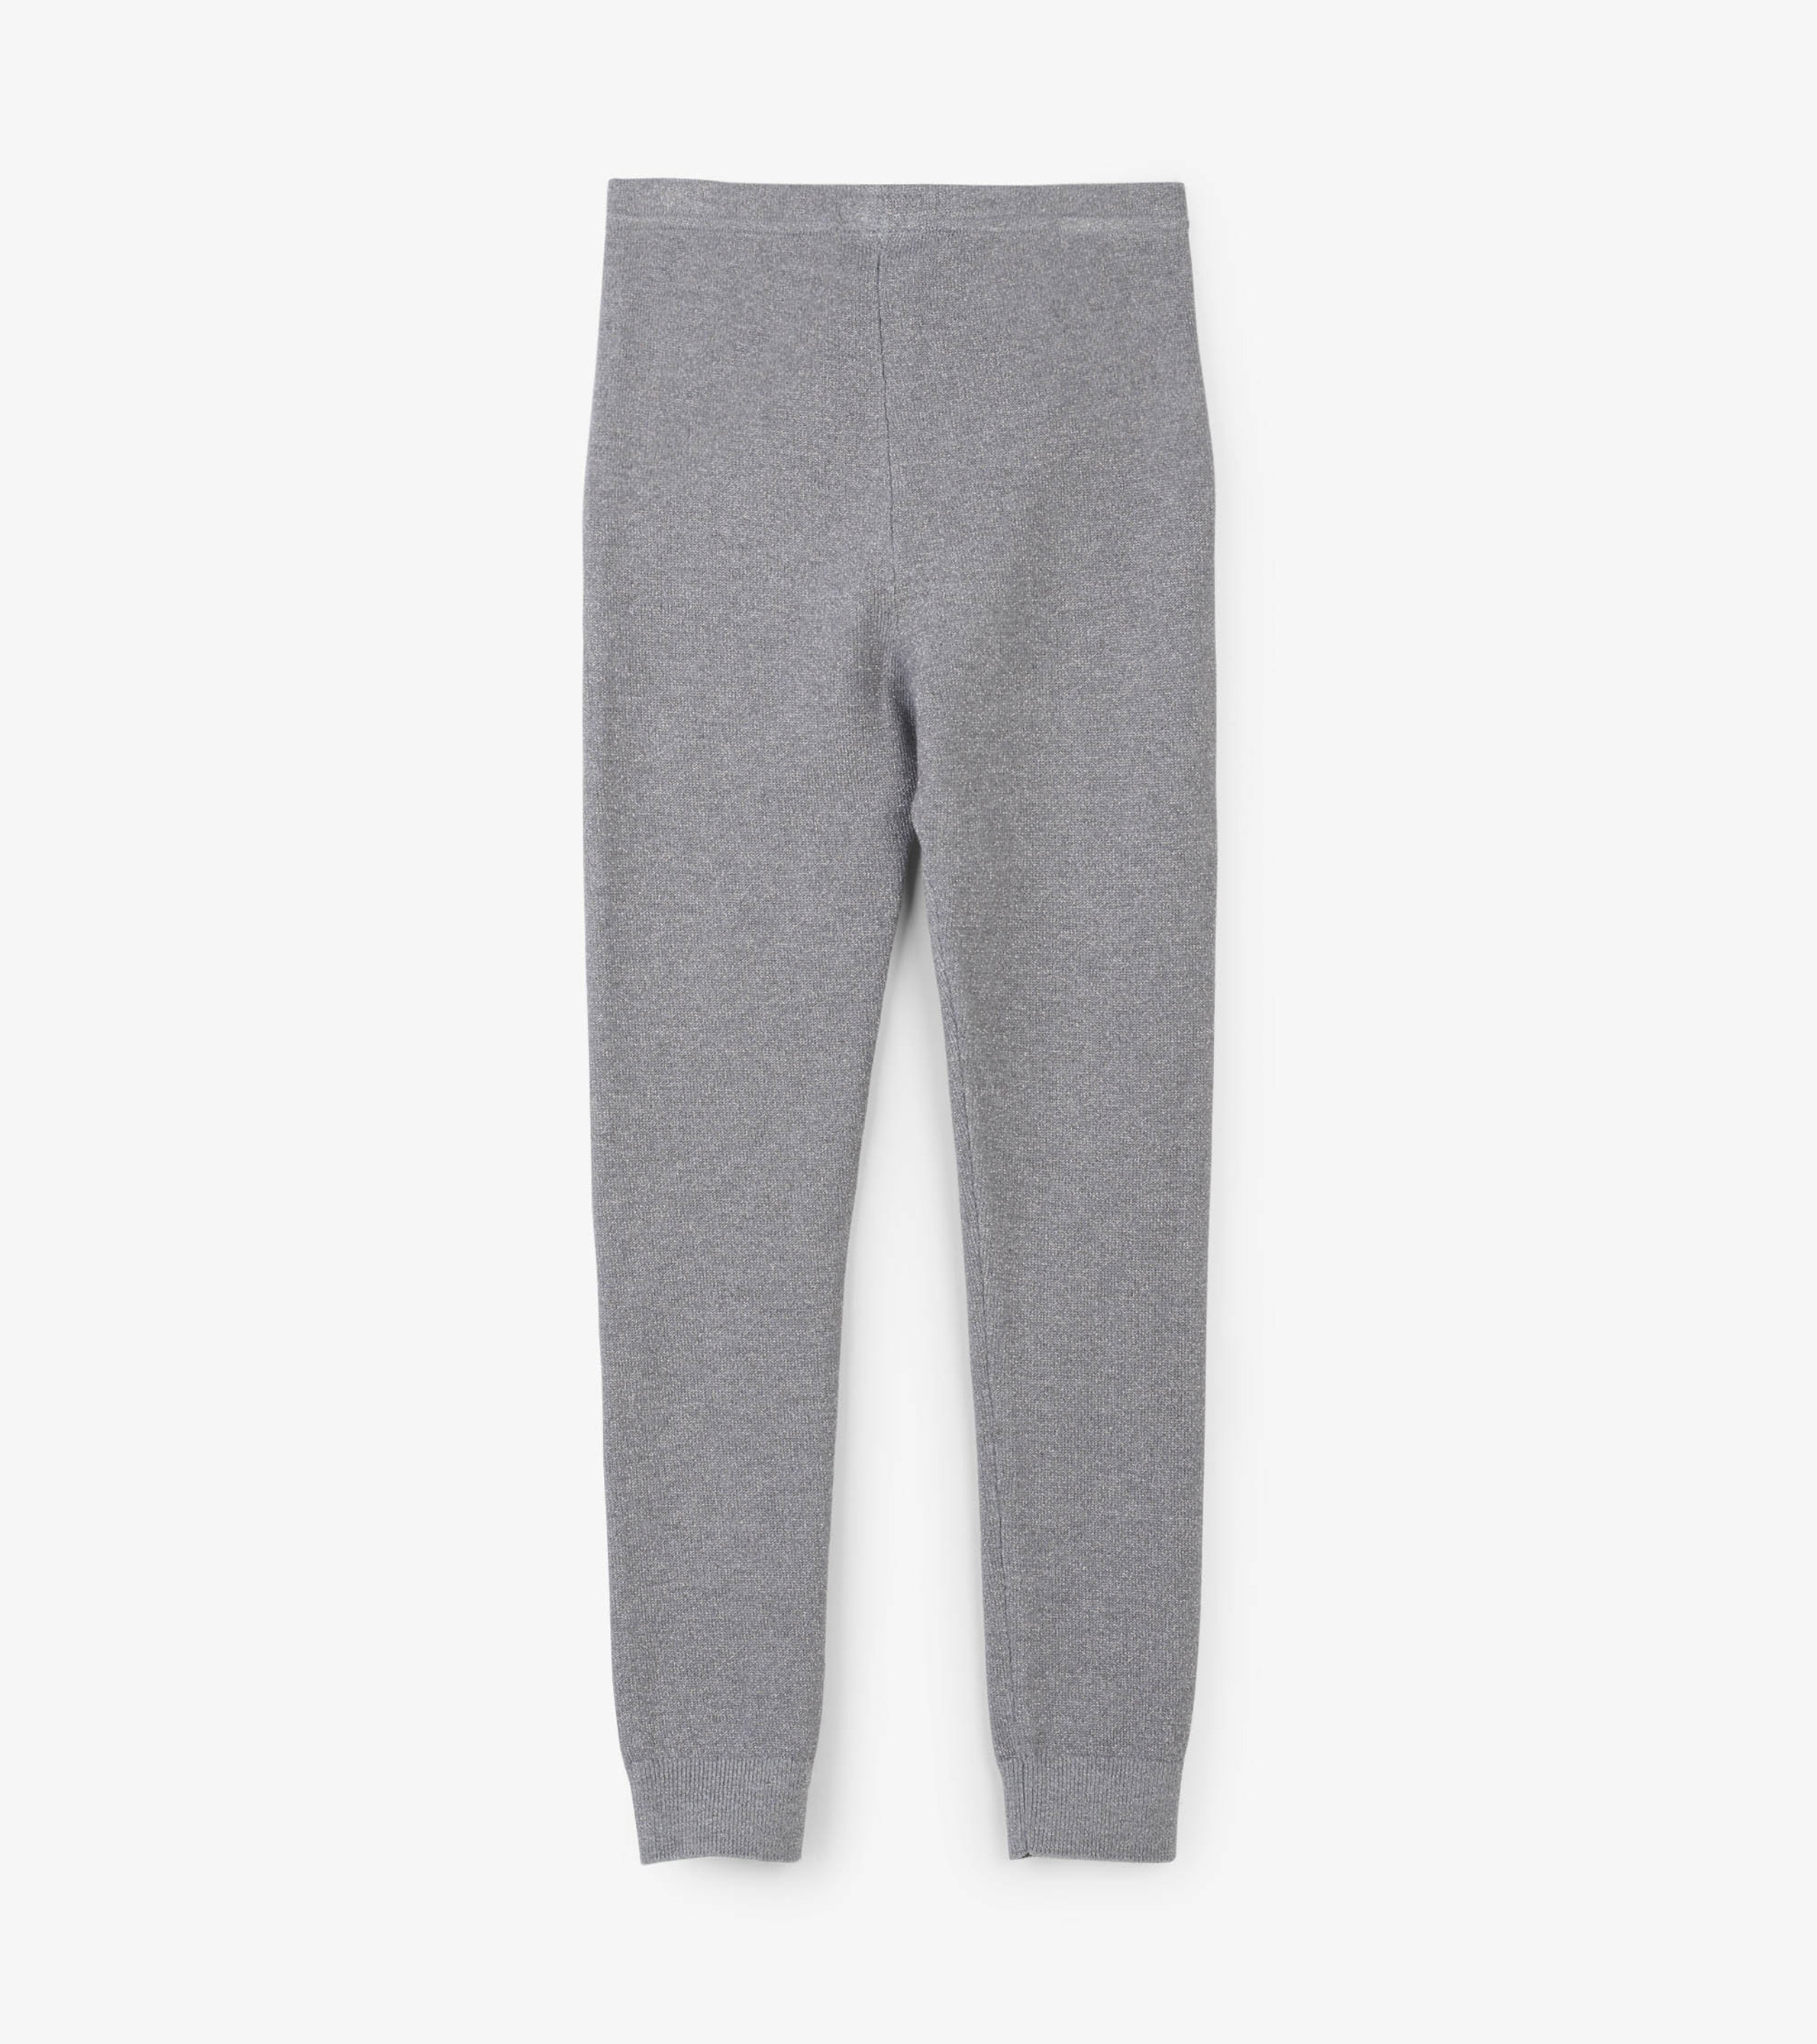 Focused On Me Hooded Cable Knit Legging Set - Heather Grey